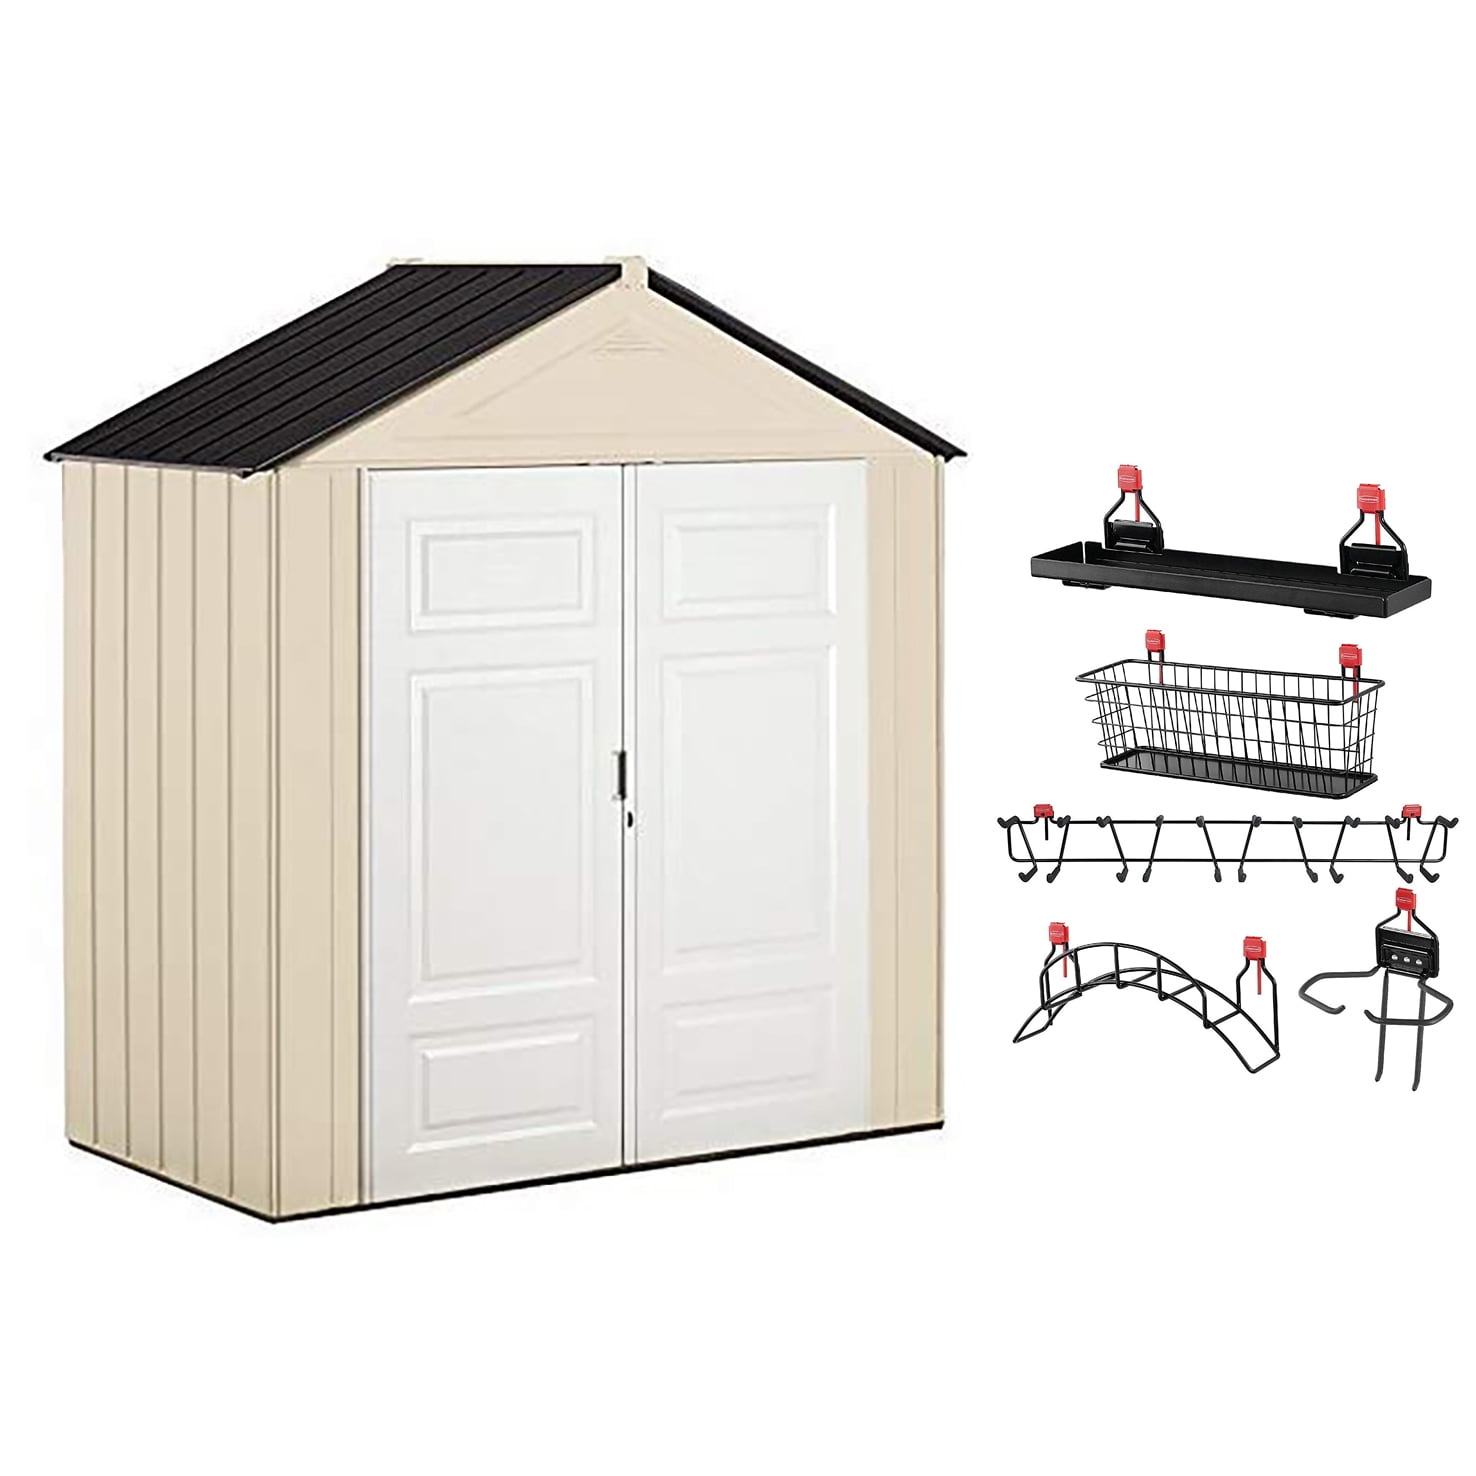 1862705 Maple//Sandstone Plastic Rubbermaid Outdoor Shed 7x3 Feet.